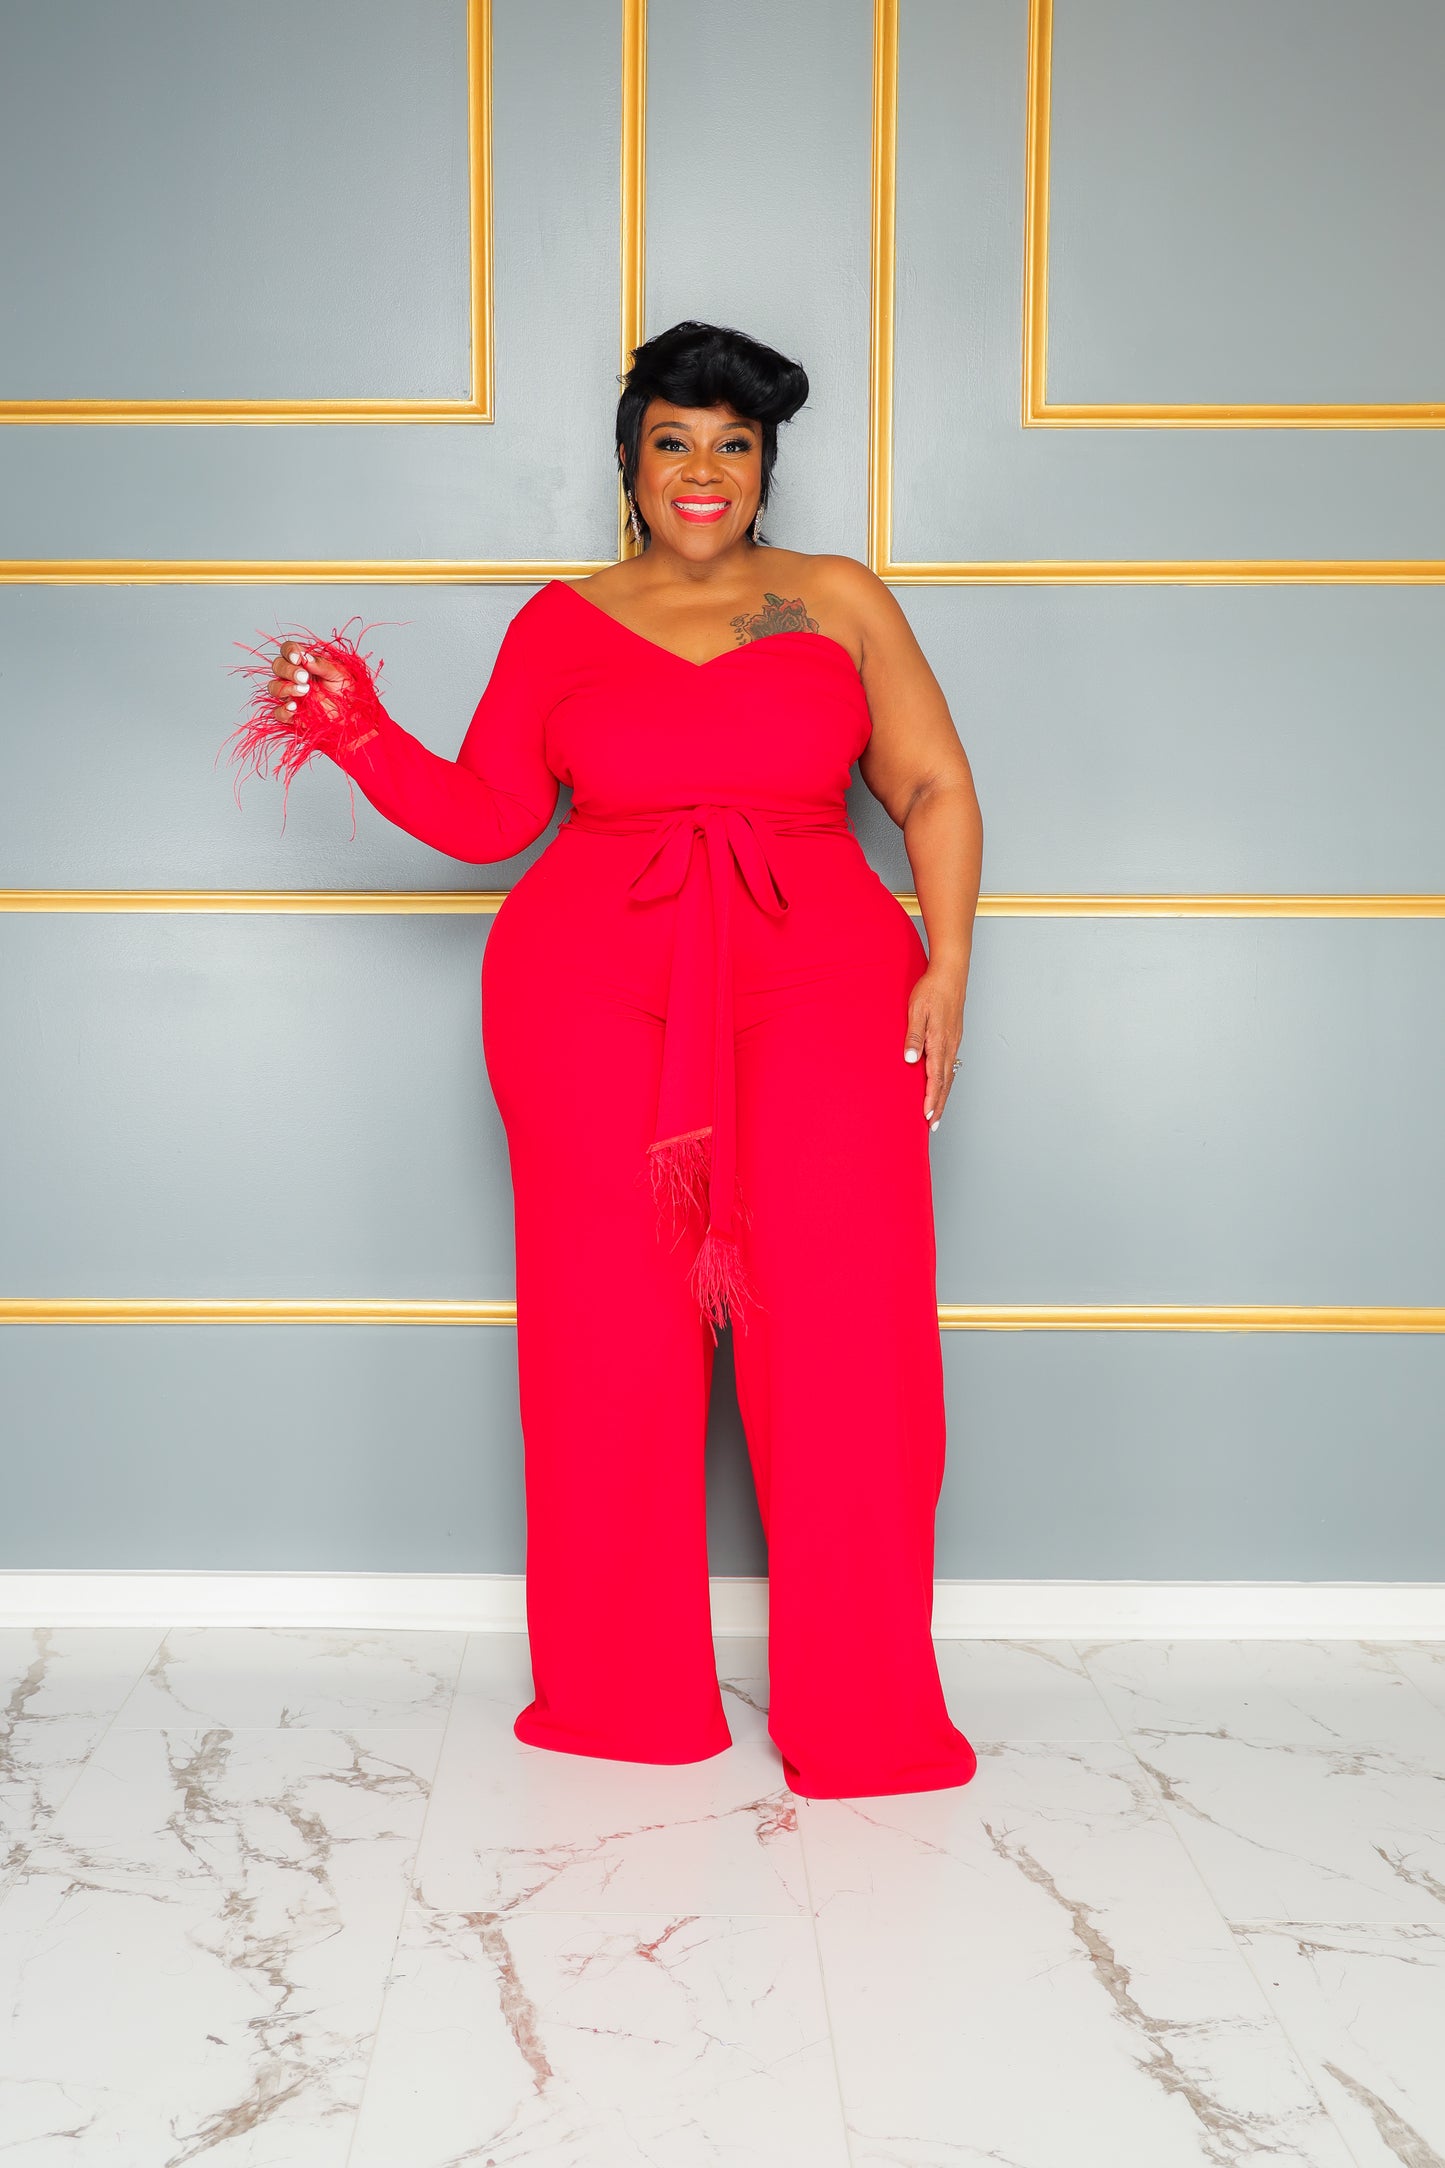 Red Fancy Feather Jumpsuit